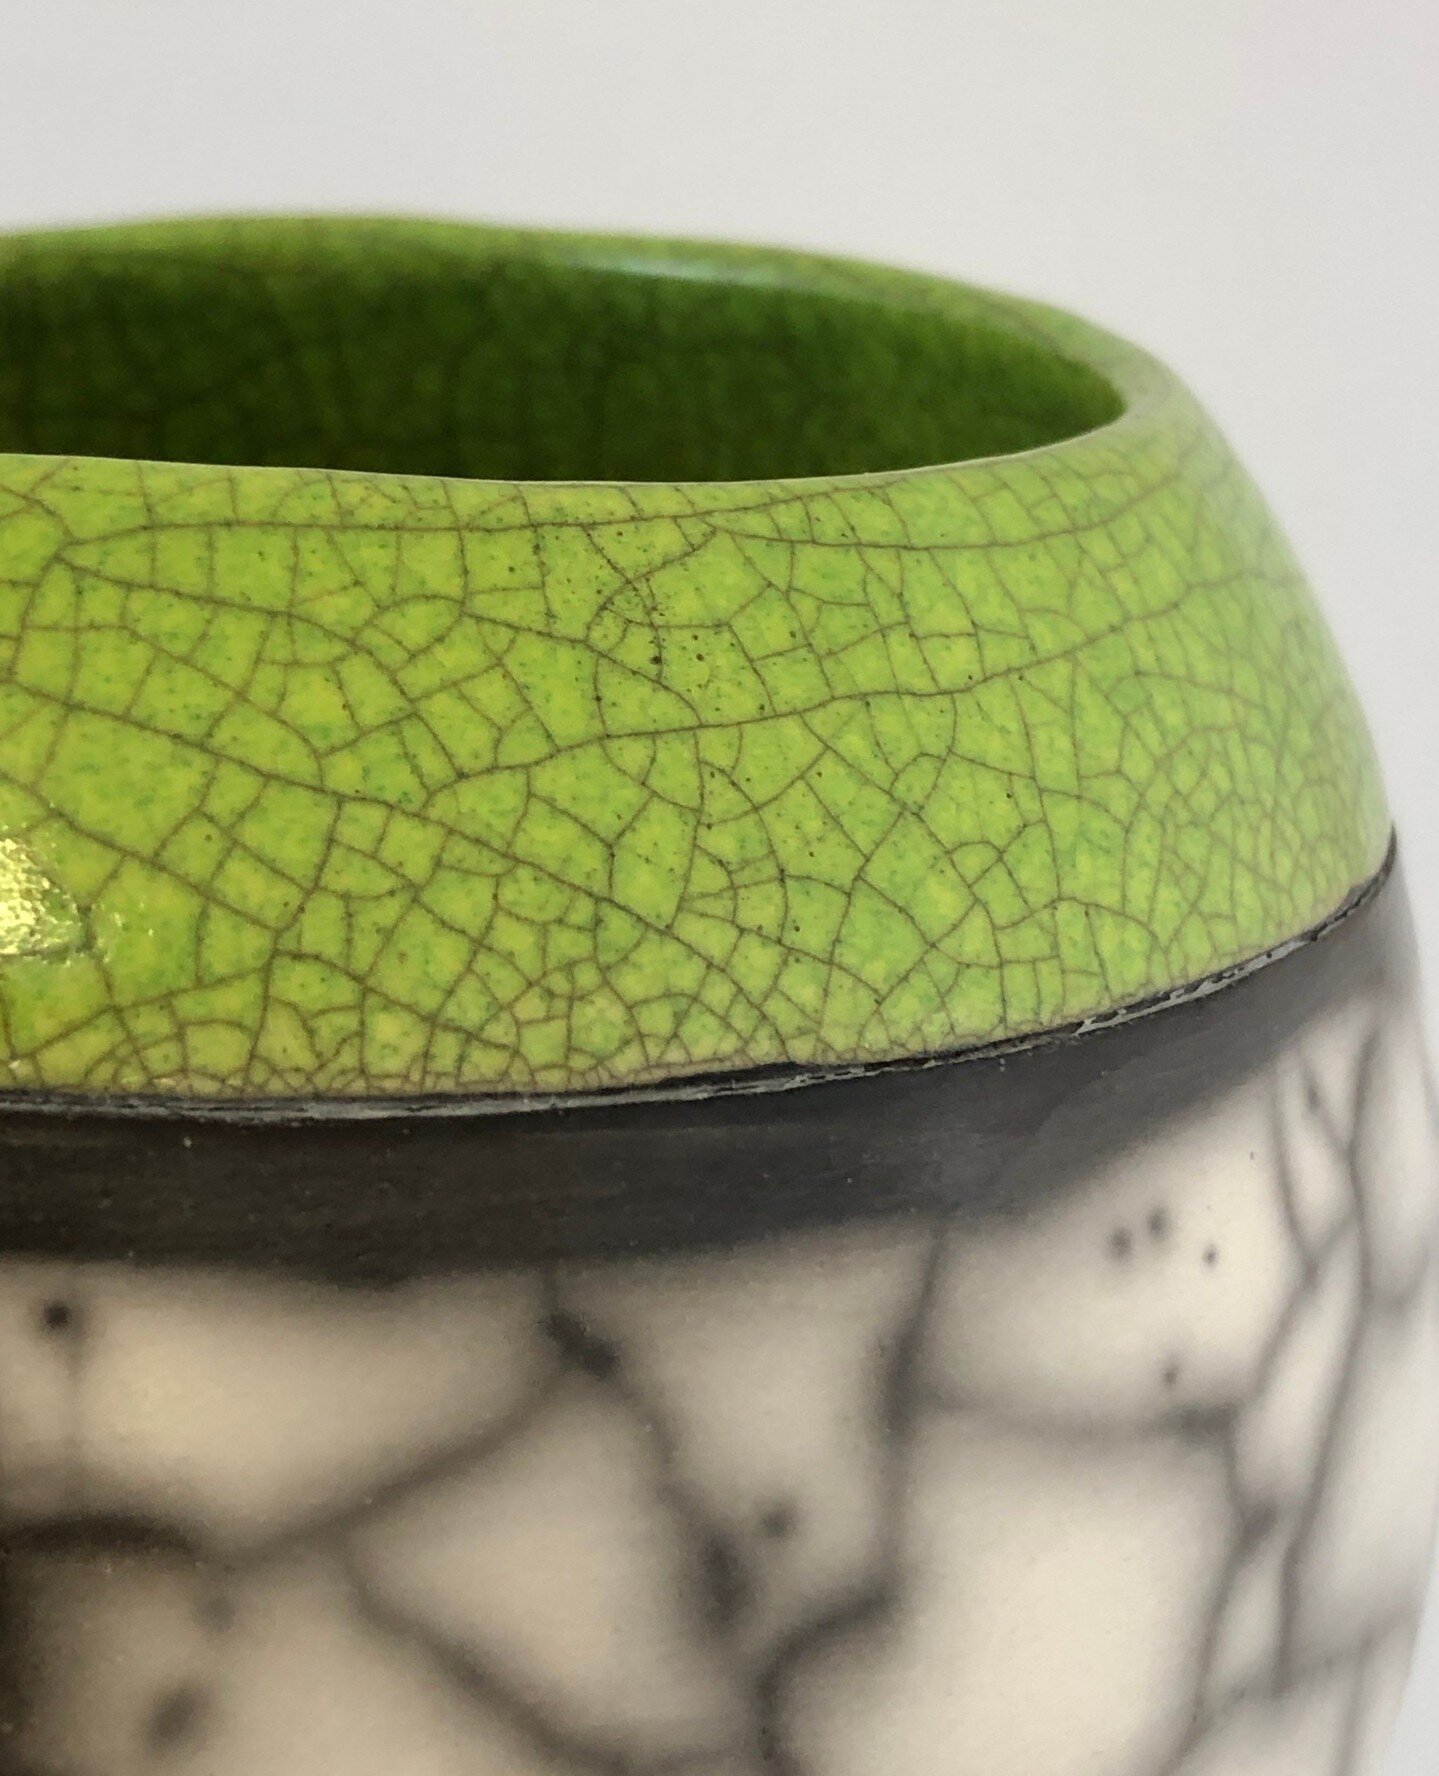 💚 New lime green glaze on this round sea and cliffs pot. I'm loving it and so pleased at how it turned out. I made this piece especially for The Colour Green spring show @besidethewavegallery in Falmouth.⁠
⁠
#thecolourgreen #besidethewavegallery #sp